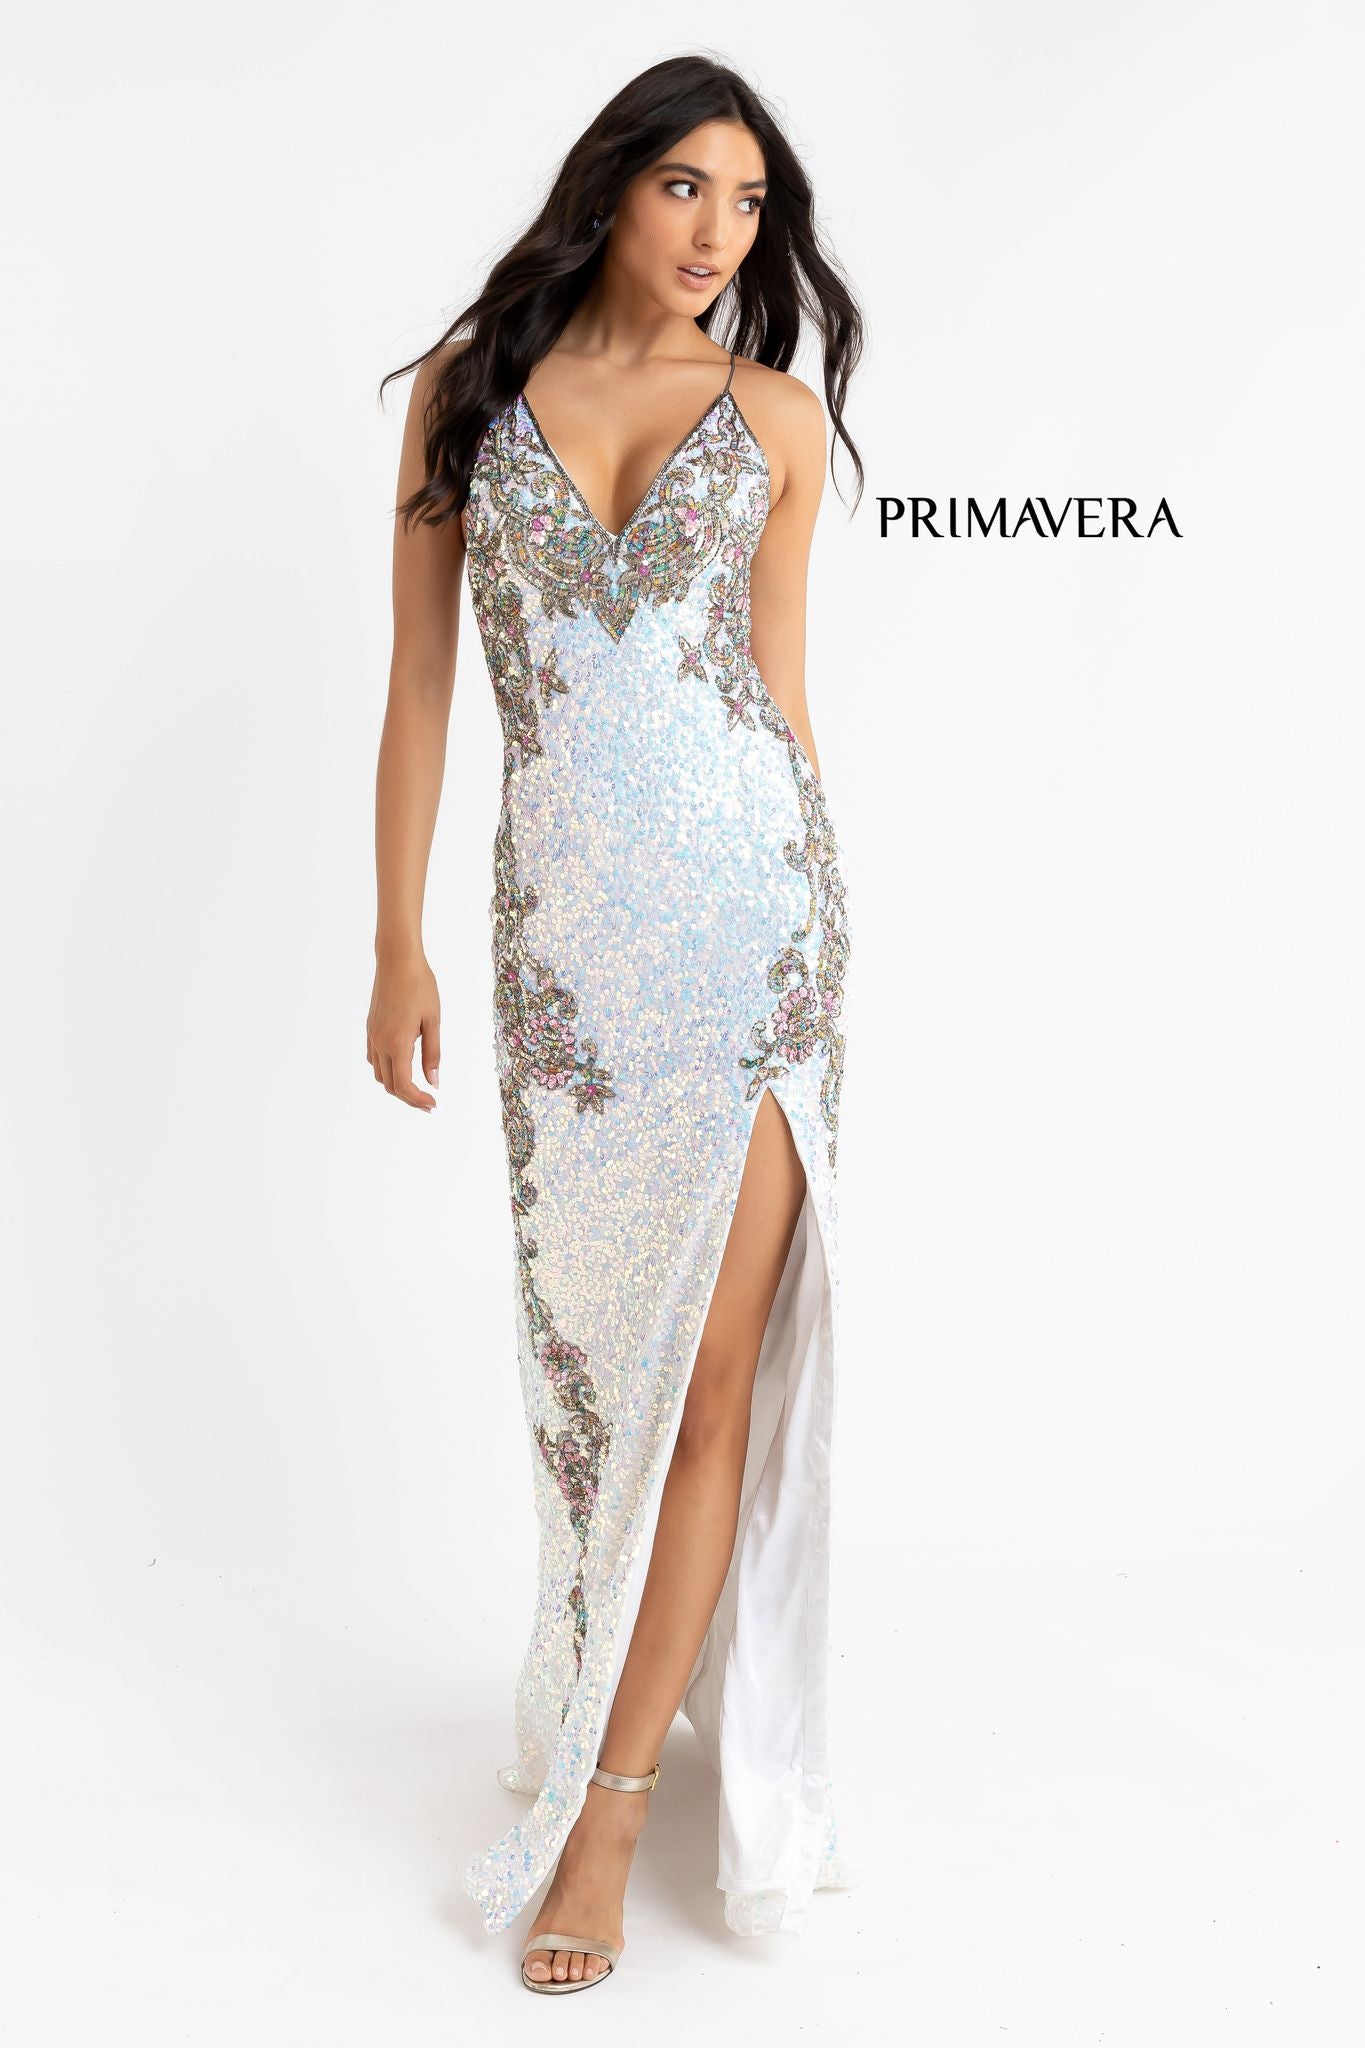 Primavera Couture 3211 Ivory  is a Long fitted sequin Embellished Formal Evening Gown. This Prom Dress Features a deep V Neck with an open Corset lace up back. Beaded & embellished elegant scroll pattern accentuate curves. Fully beaded prom dress with floral pattern and side slit. Long Sequin Gown featuring a v neckline. slit in the fitted skirt, Slit in Thigh. Stunning Pageant Dress, Prom Gown & More!